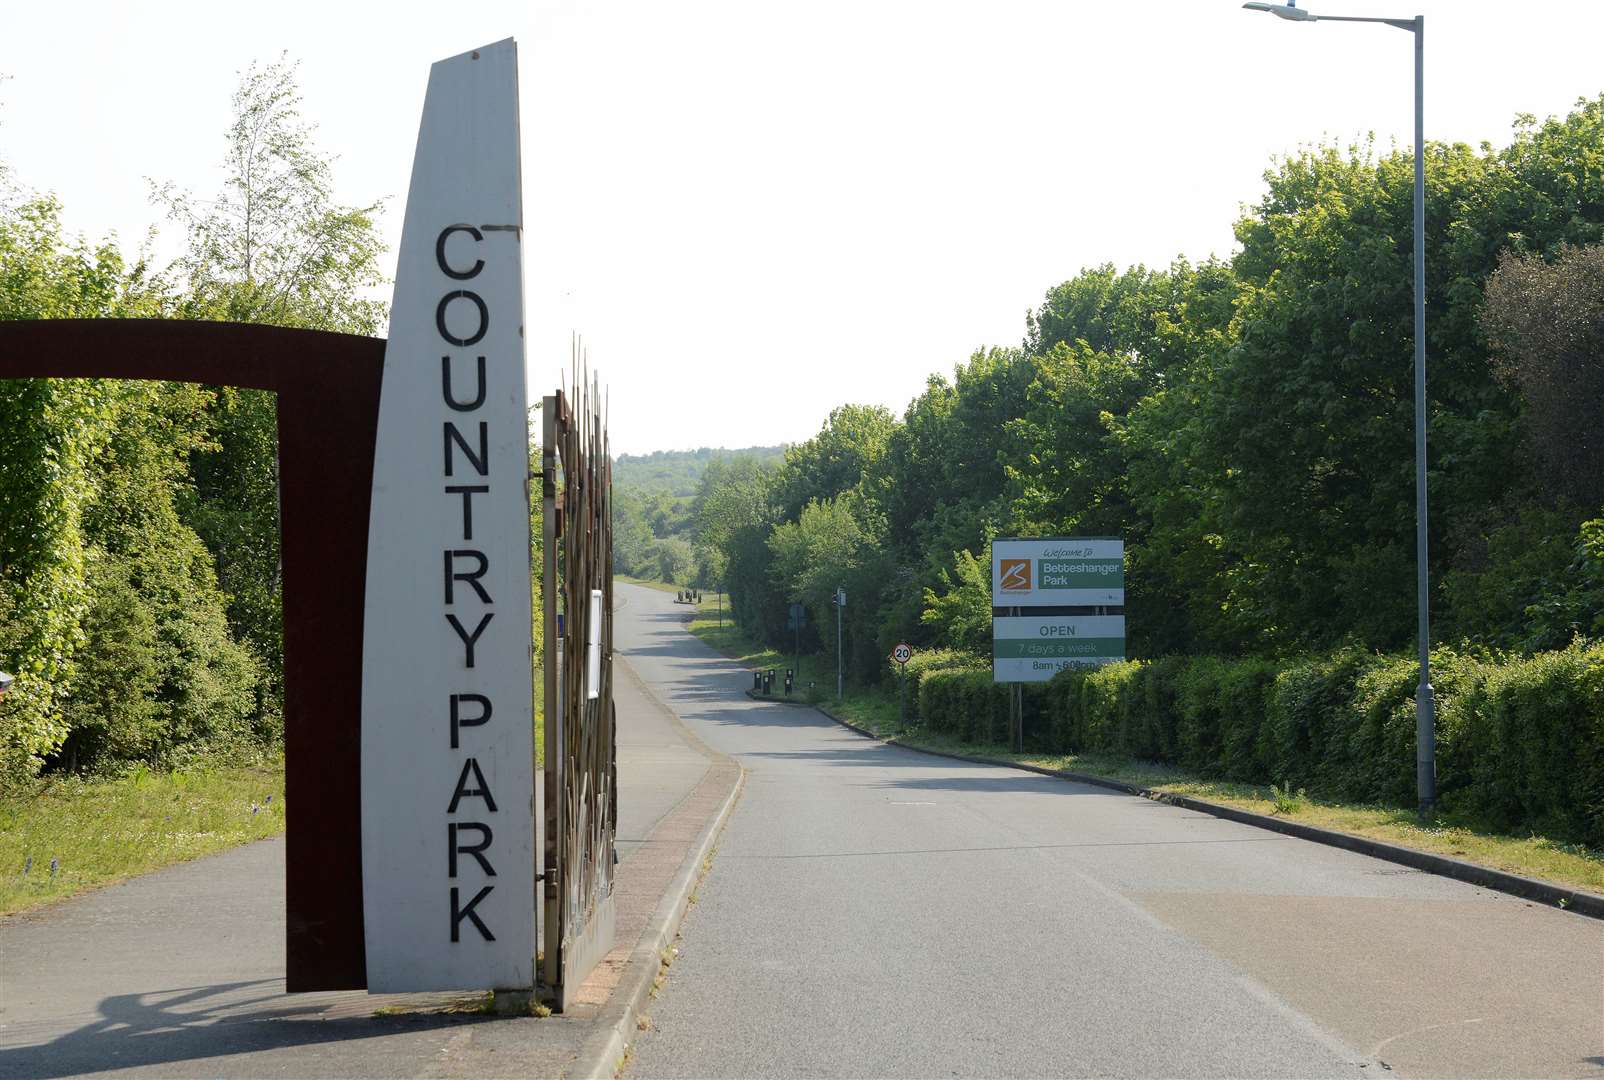 Betteshanger Country Park was created from former colliery land